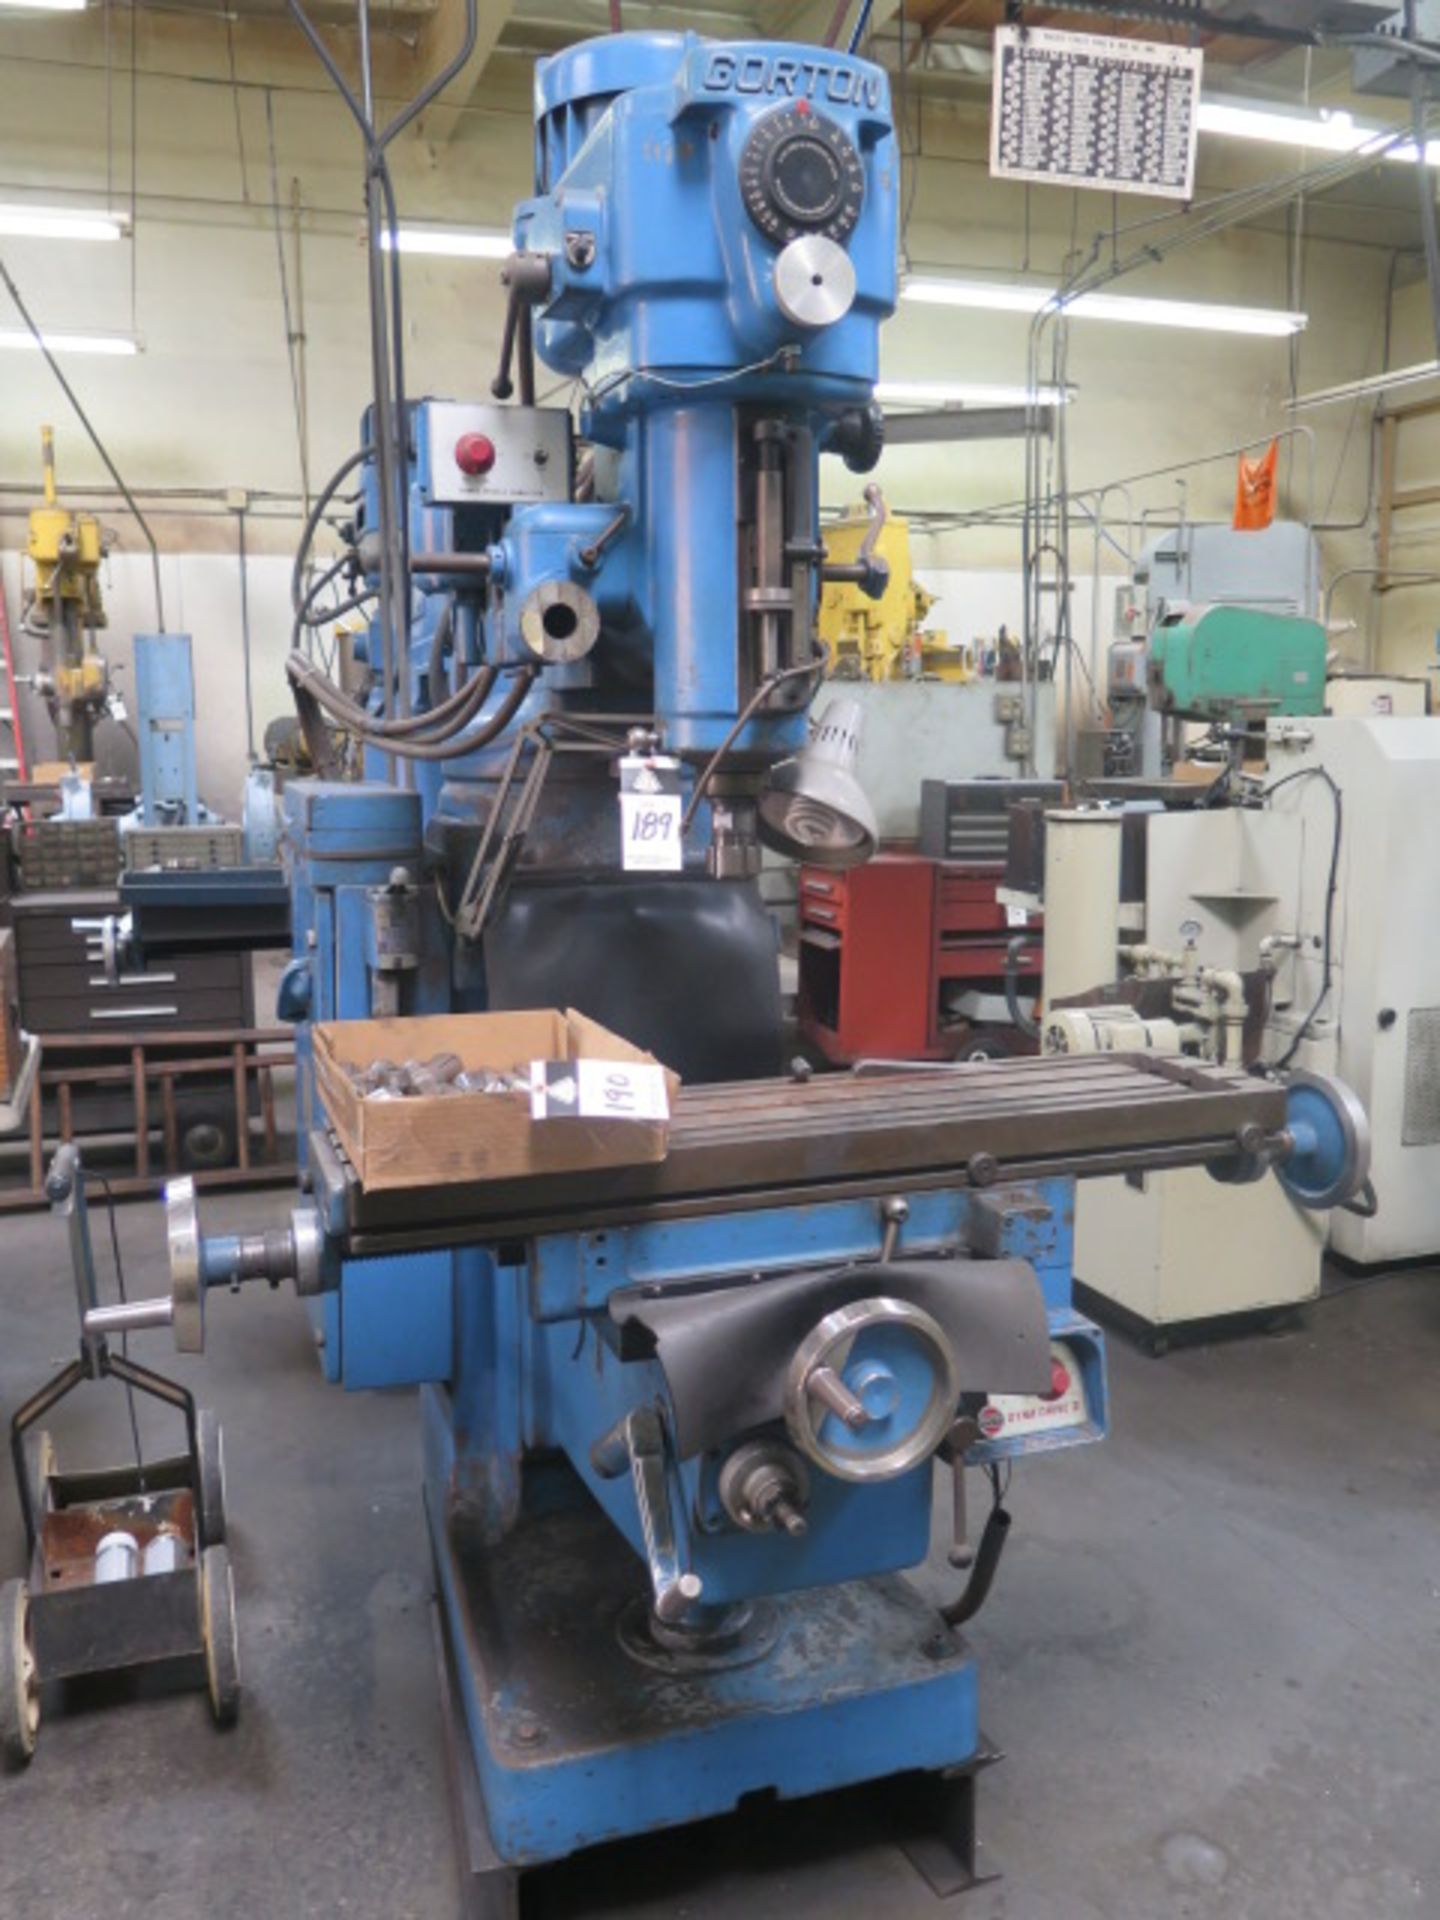 Gorton “Mastermill” mdl. 1-22 Vertical Mill w/ 650-4600 Dial Change RPM, 40-Taper Spindle, Box Ways,